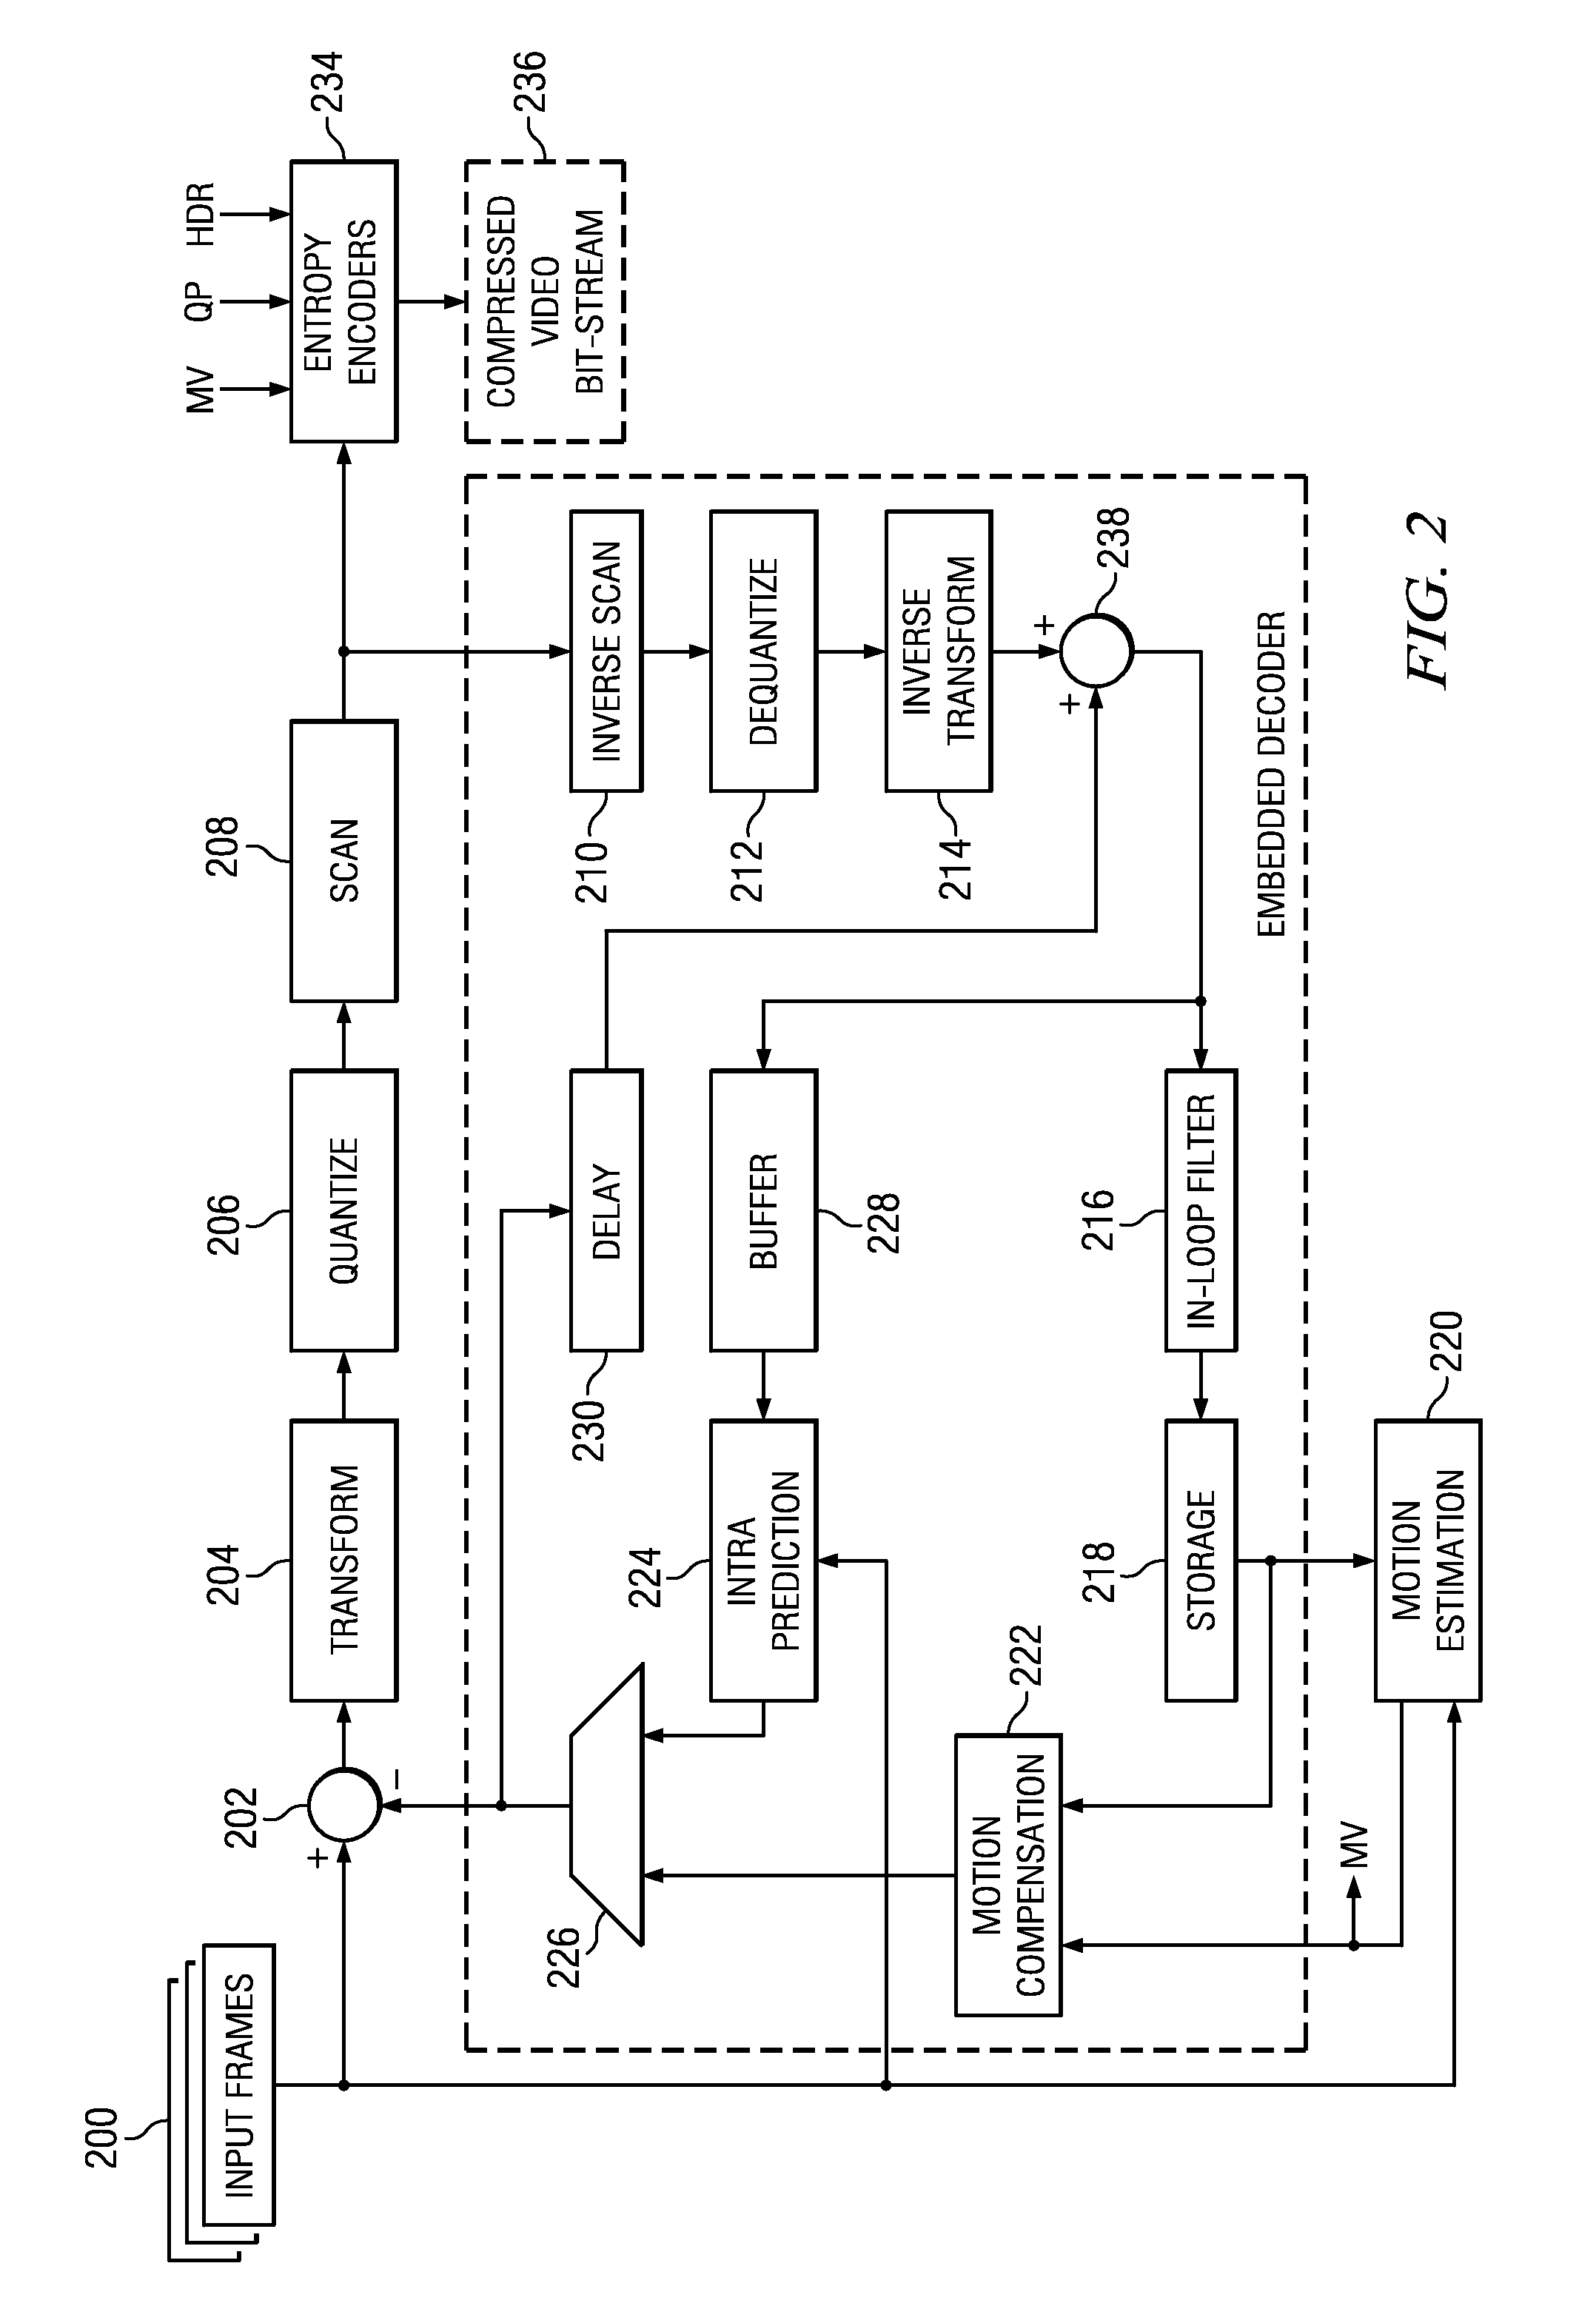 Method and System for Intracoding in Video Encoding